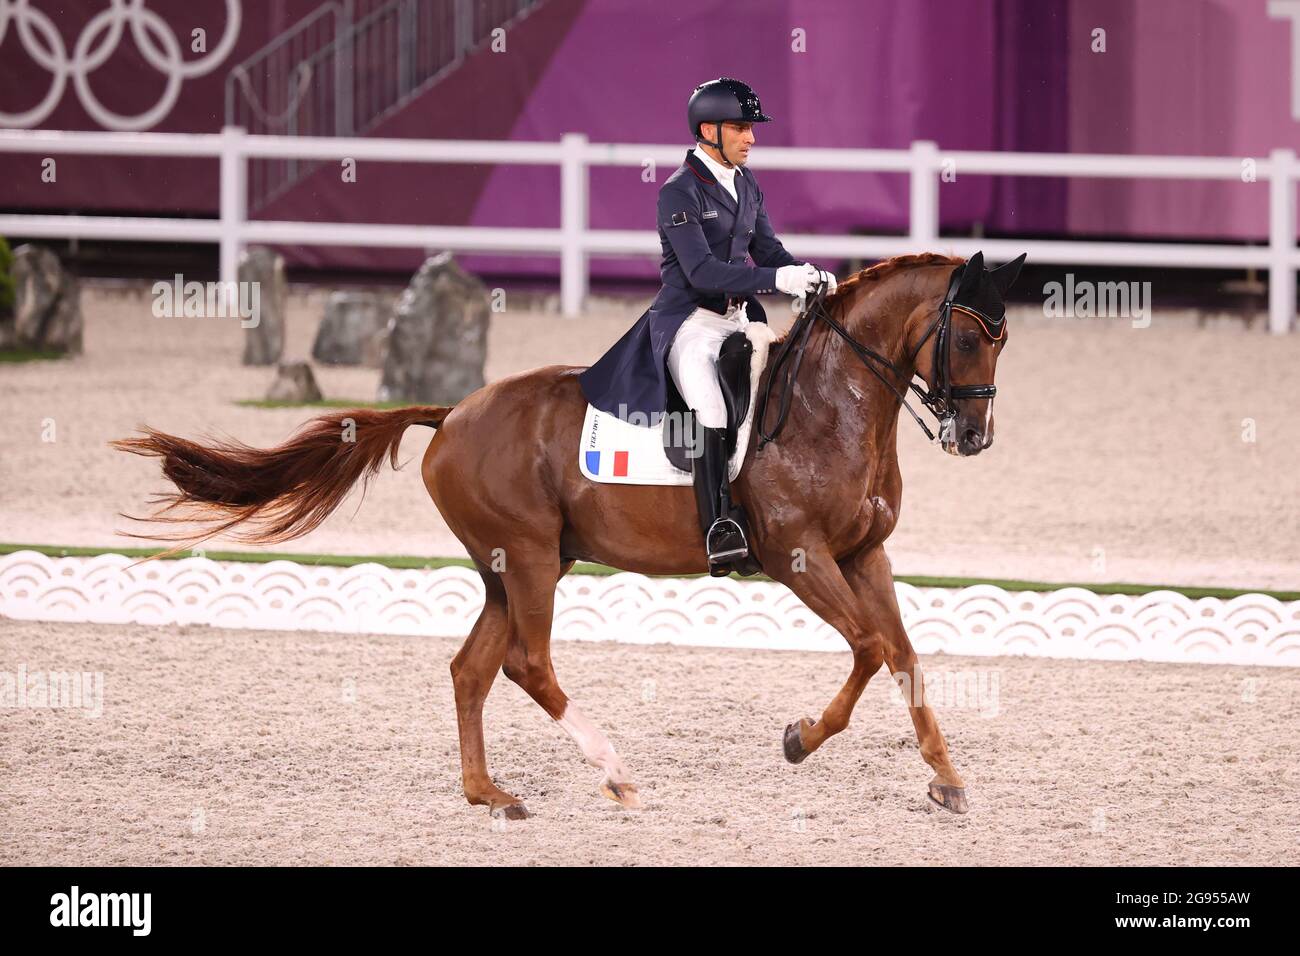 Tokyo, Japan. 24th July, 2021. Alexandre Ayache (FRA) Equestrian : Dressage Team Qualification during the Tokyo 2020 Olympic Games at the Equestrian Park (Baji Koen) in Tokyo, Japan . Credit: Yohei Osada/AFLO SPORT/Alamy Live News Stock Photo